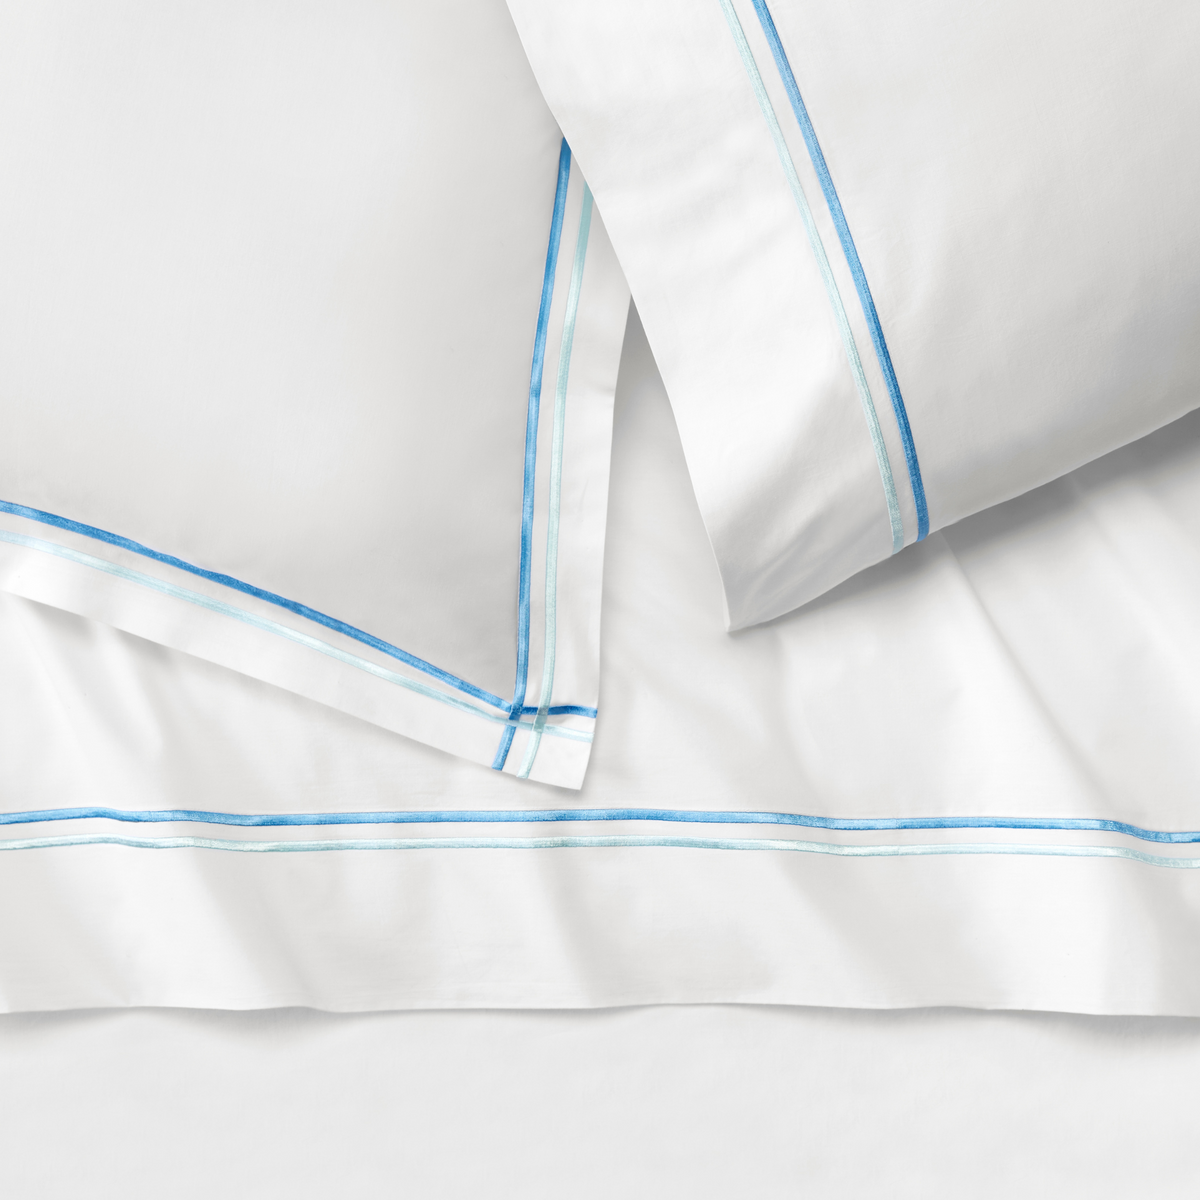 Sferra Tratto Bedding Texture of Sham Pillowcase and Sheet White/Clearwater